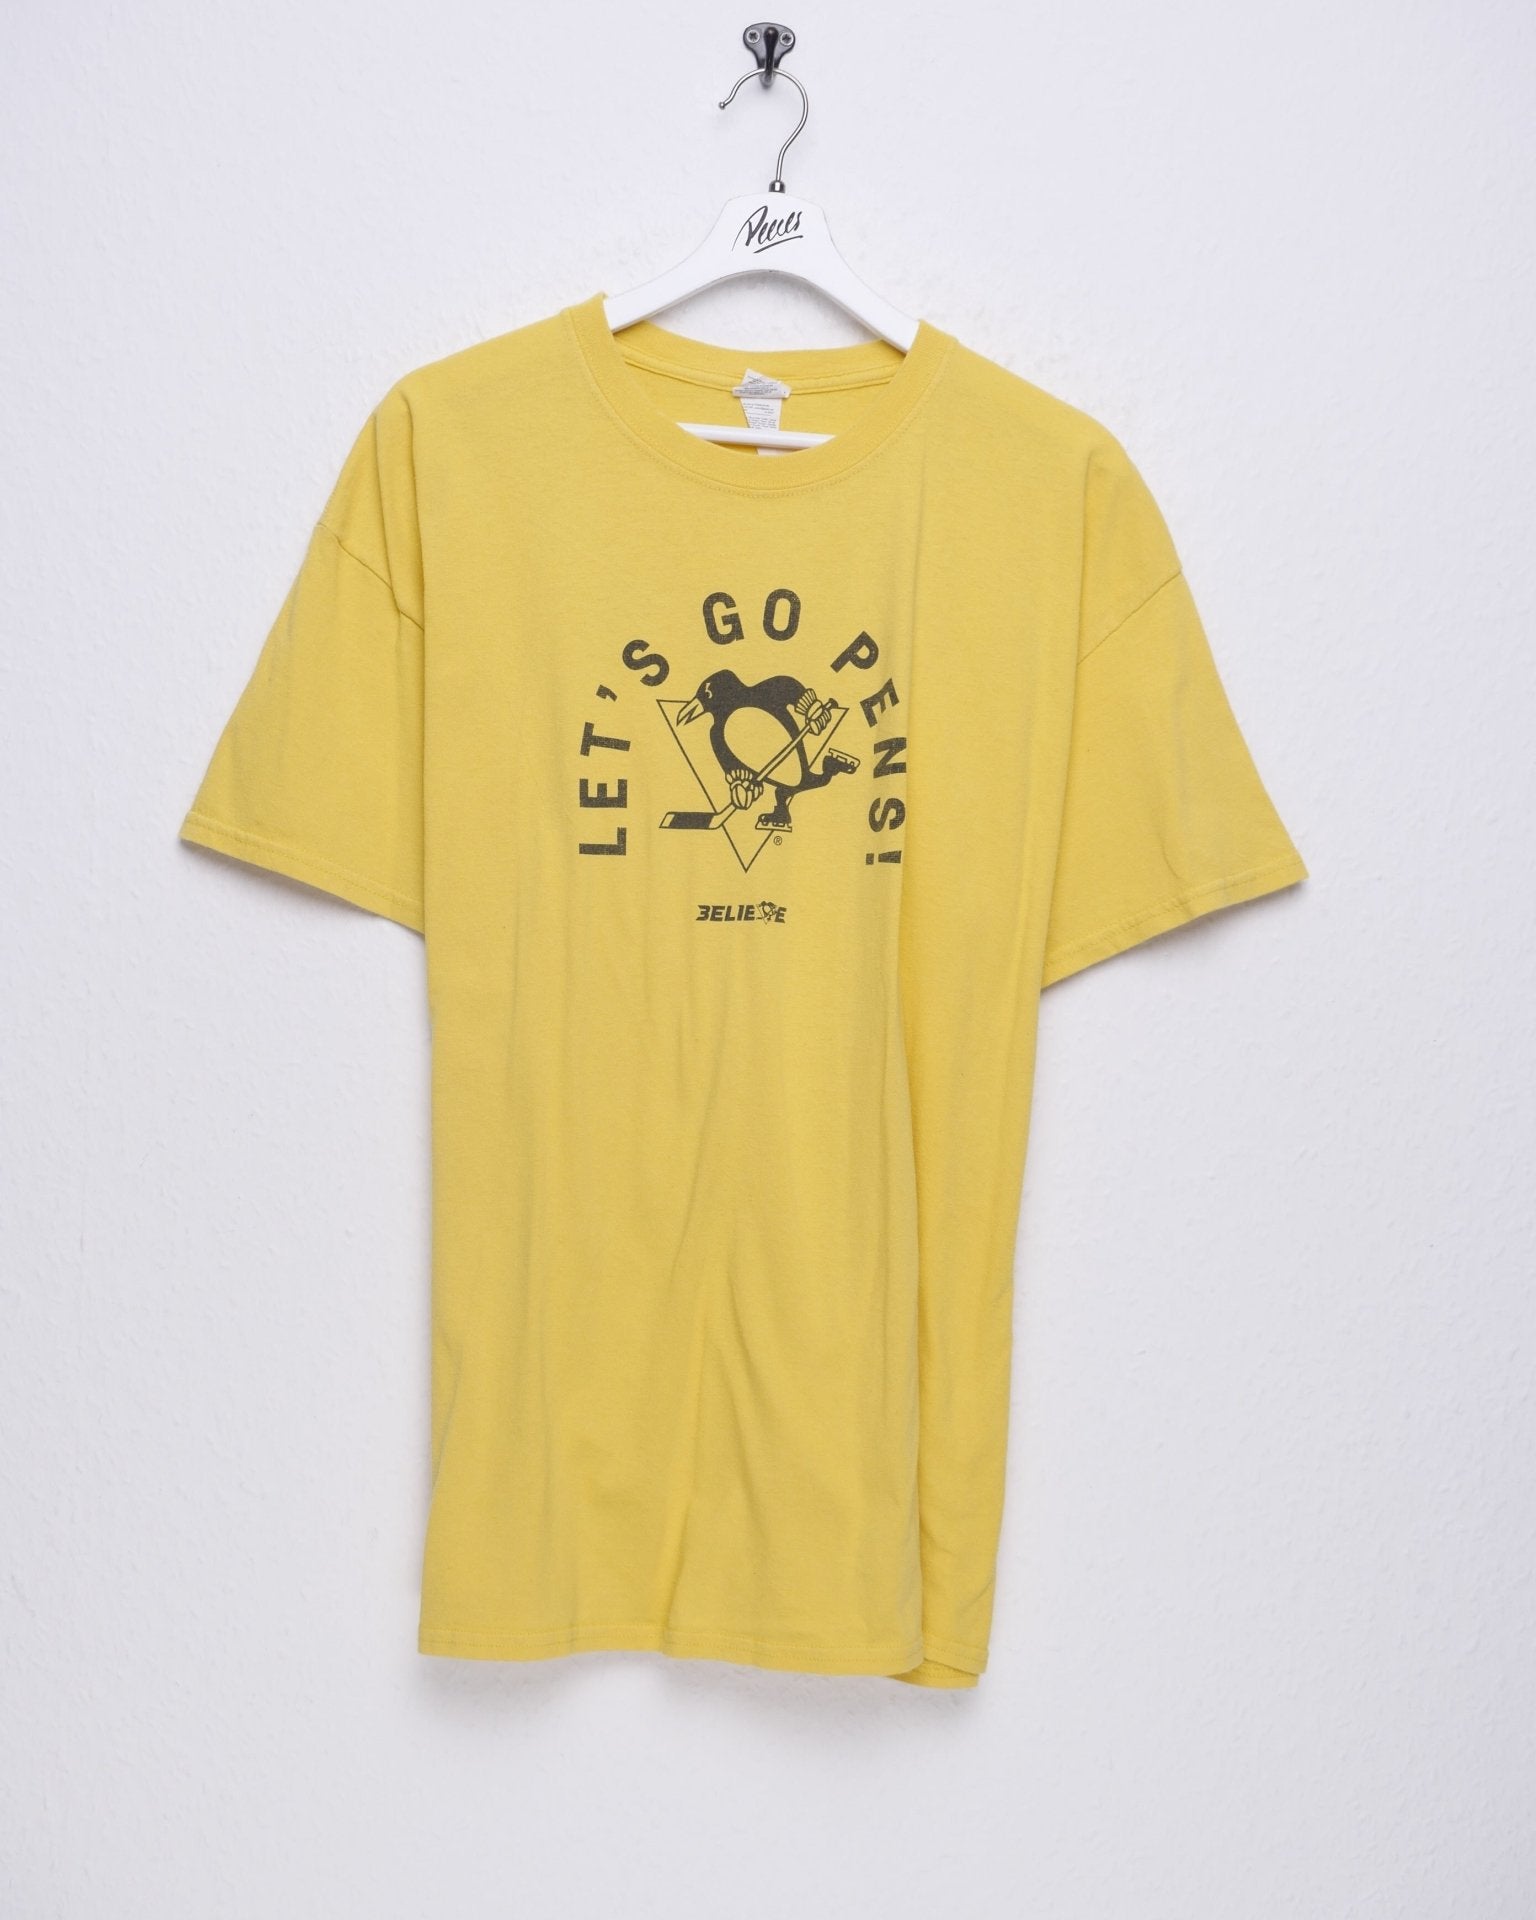 Let's Go Pens printed Spellout yellow Shirt - Peeces